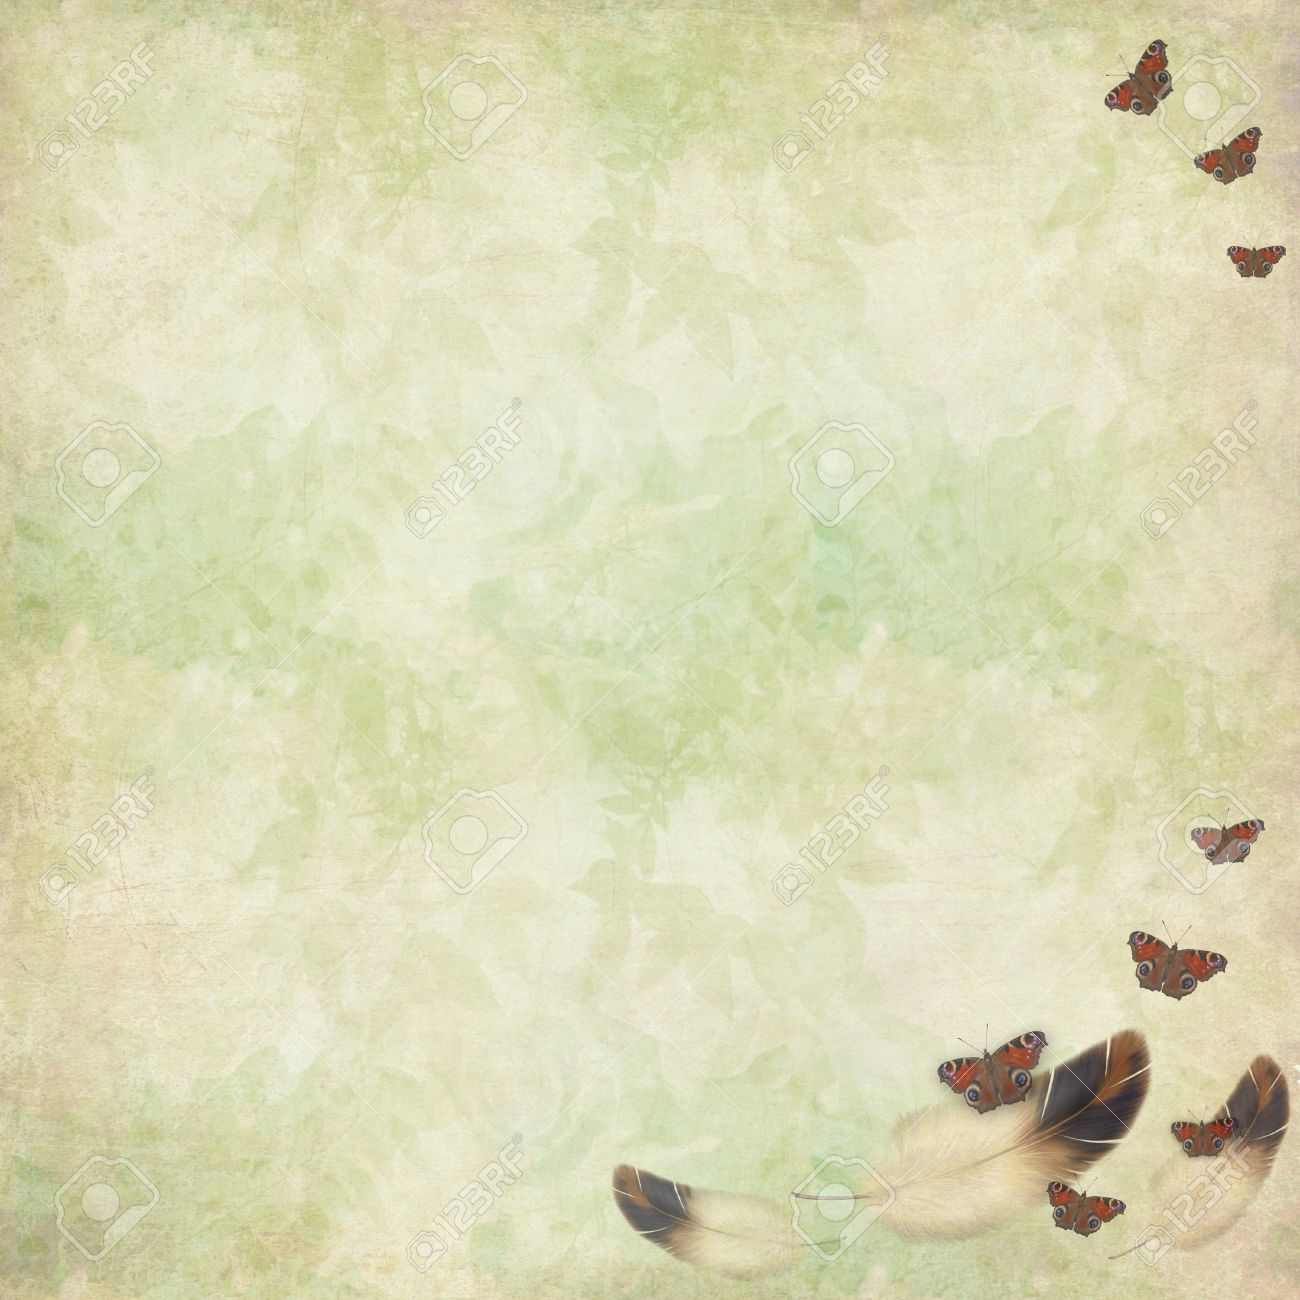 Vintage Grunge Wallpaper With Butterflies And Feathers Swirling